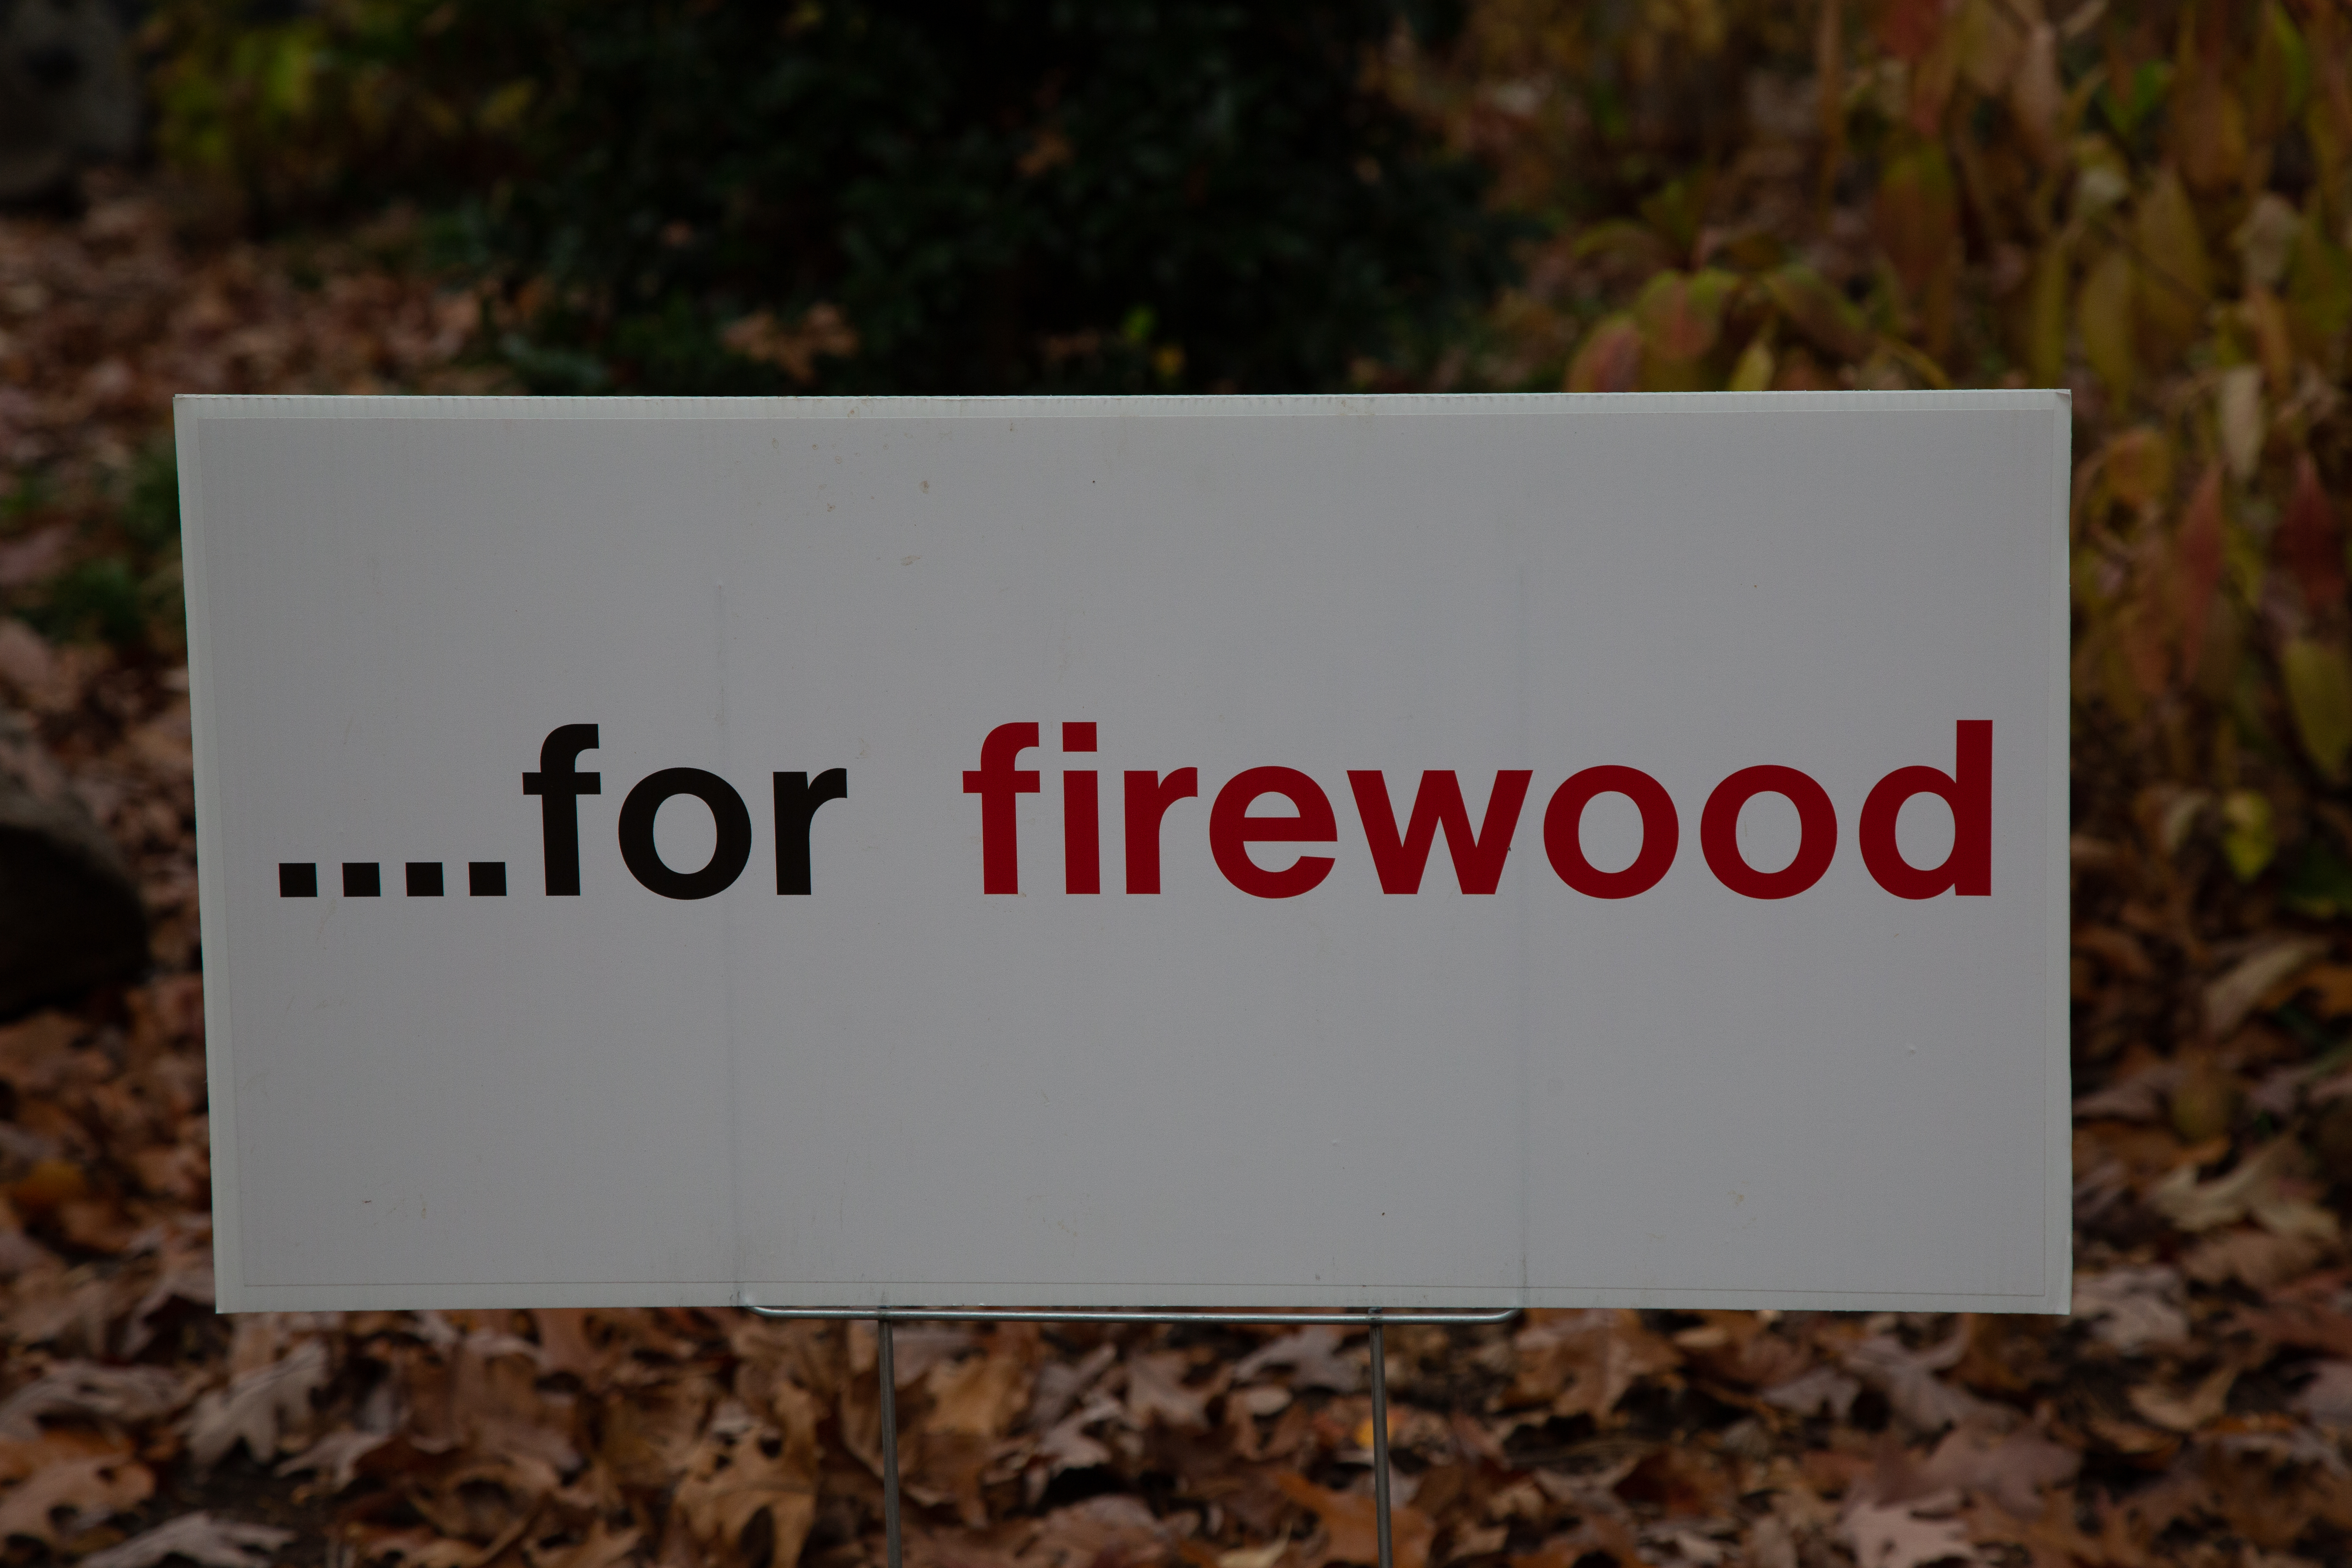 ...for firewood